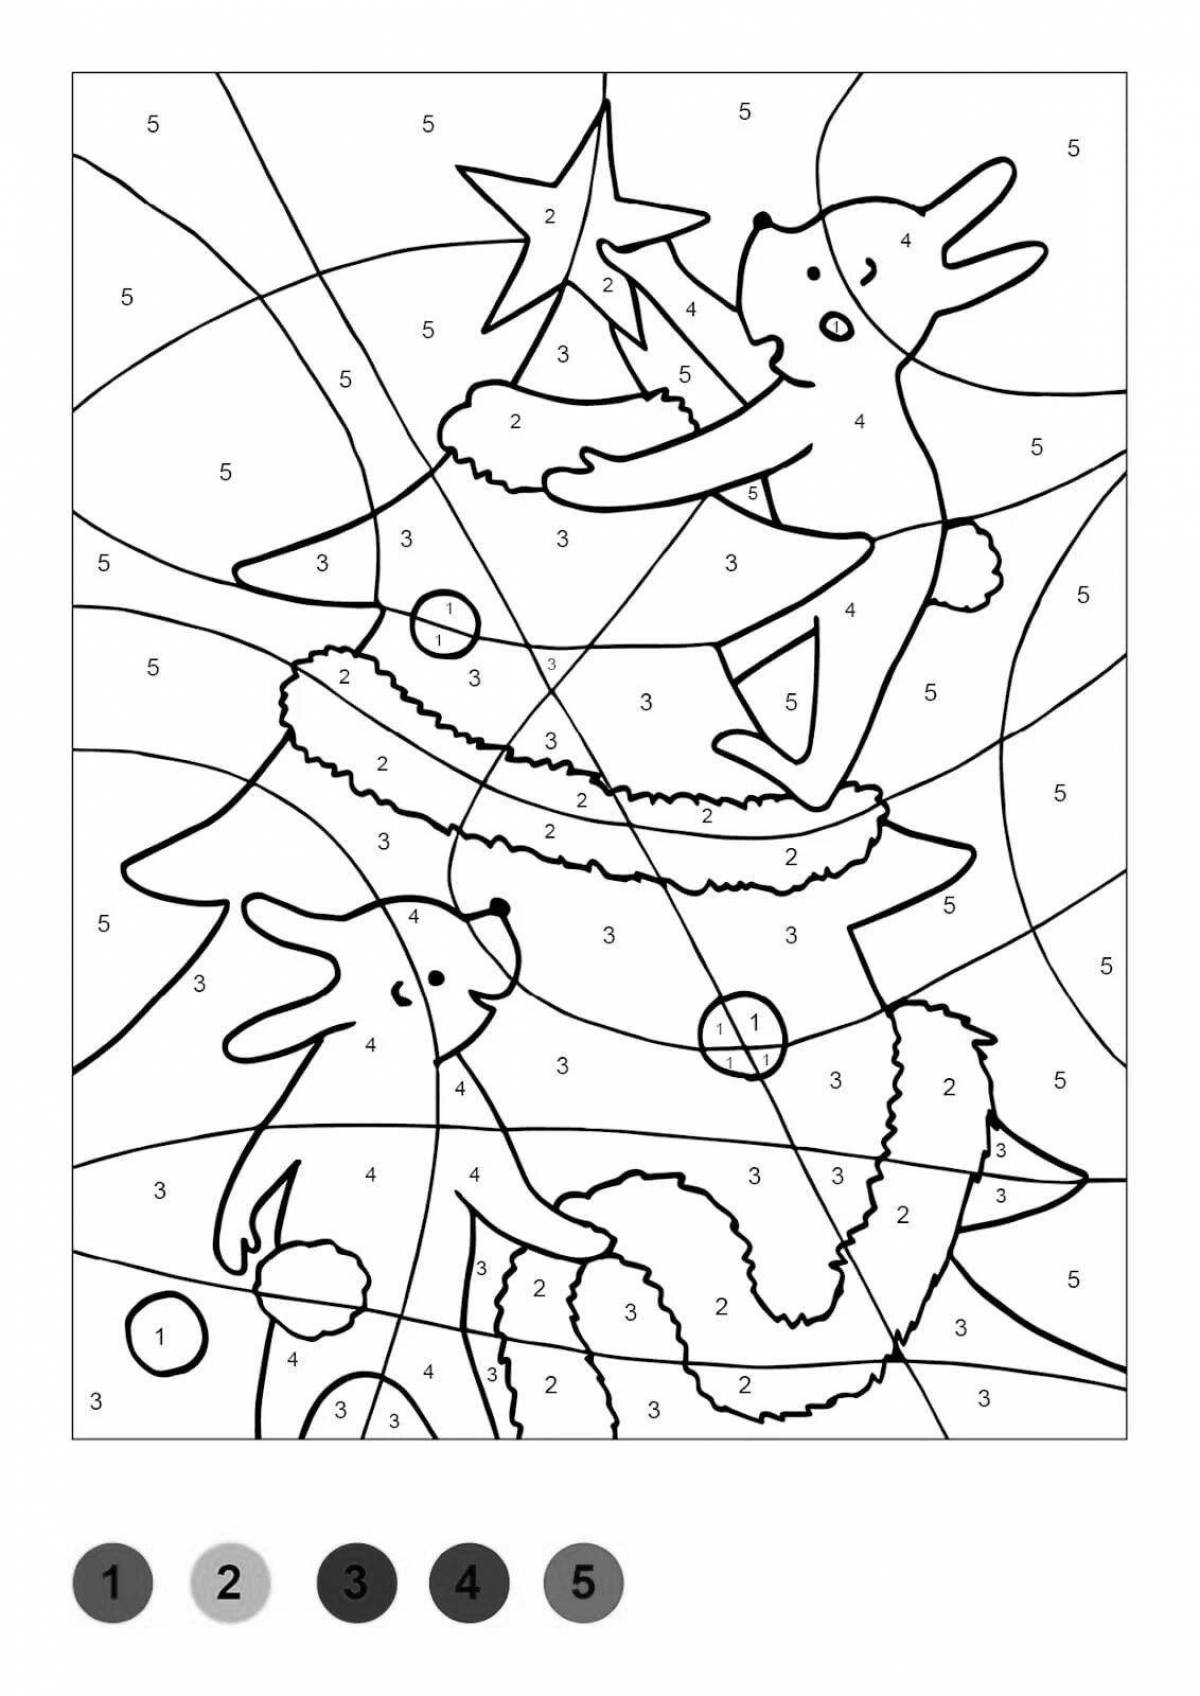 Great winter coloring by number for kids